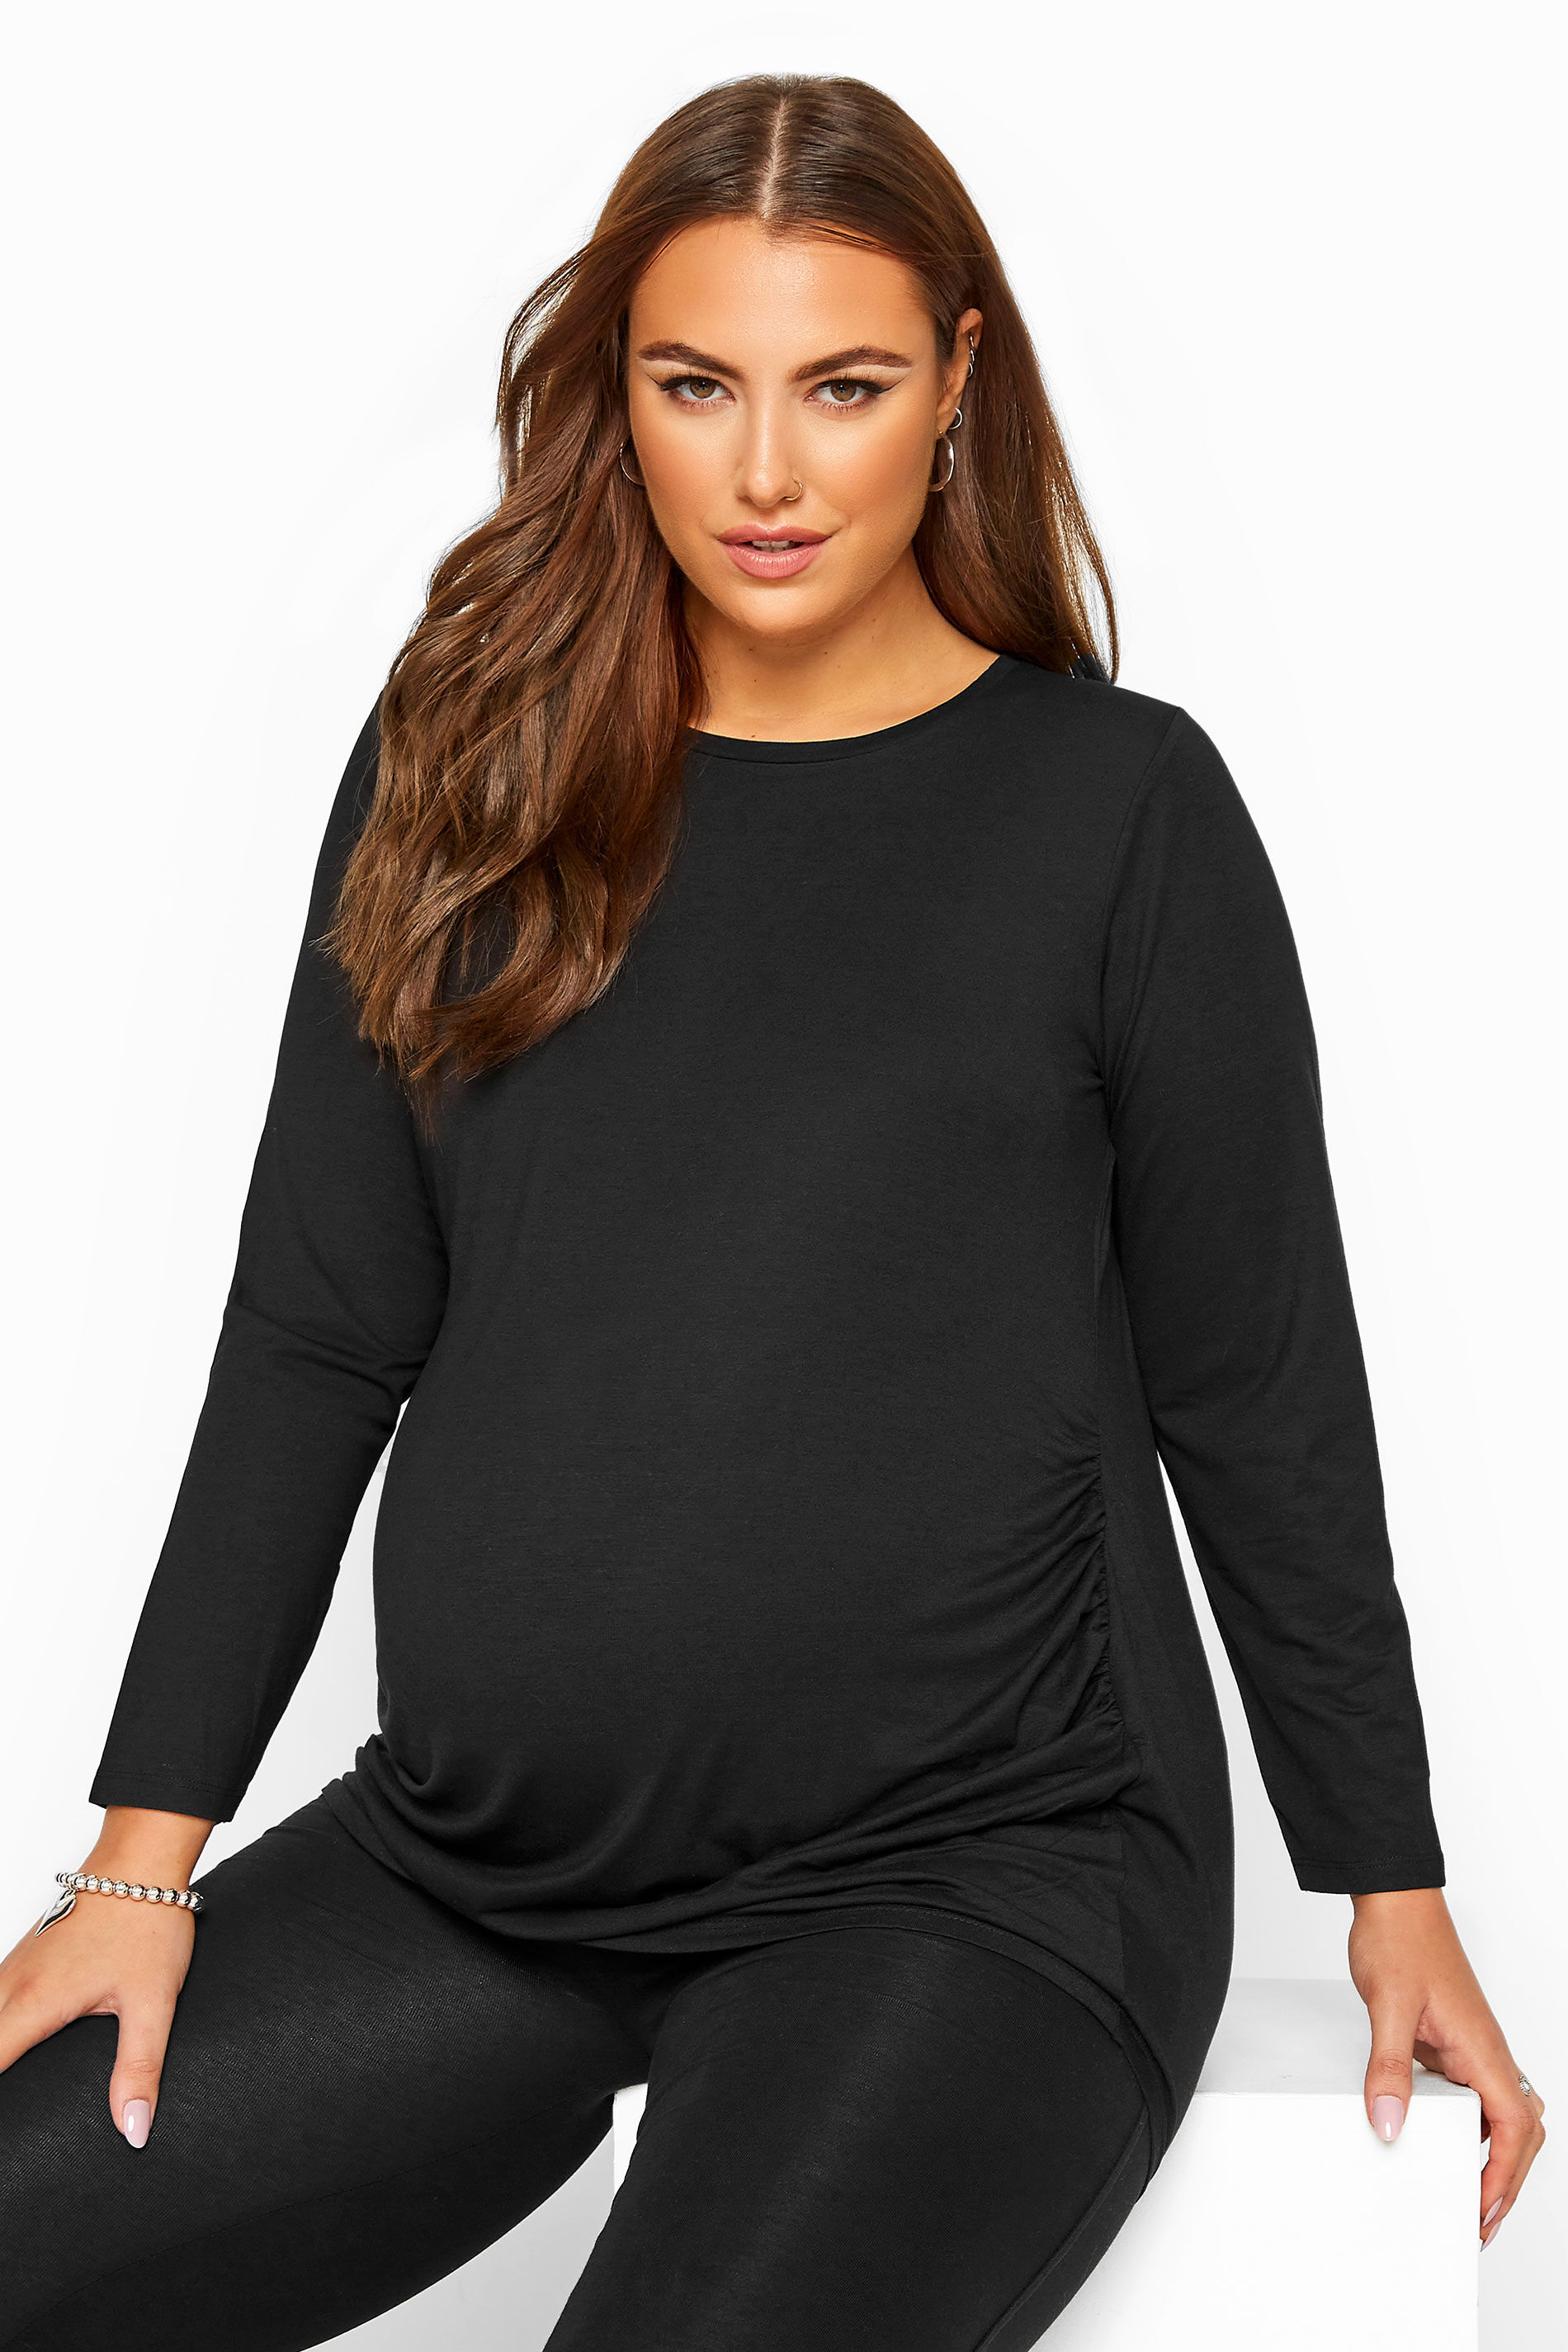 Yours Clothing Bump it up maternity black long sleeve top